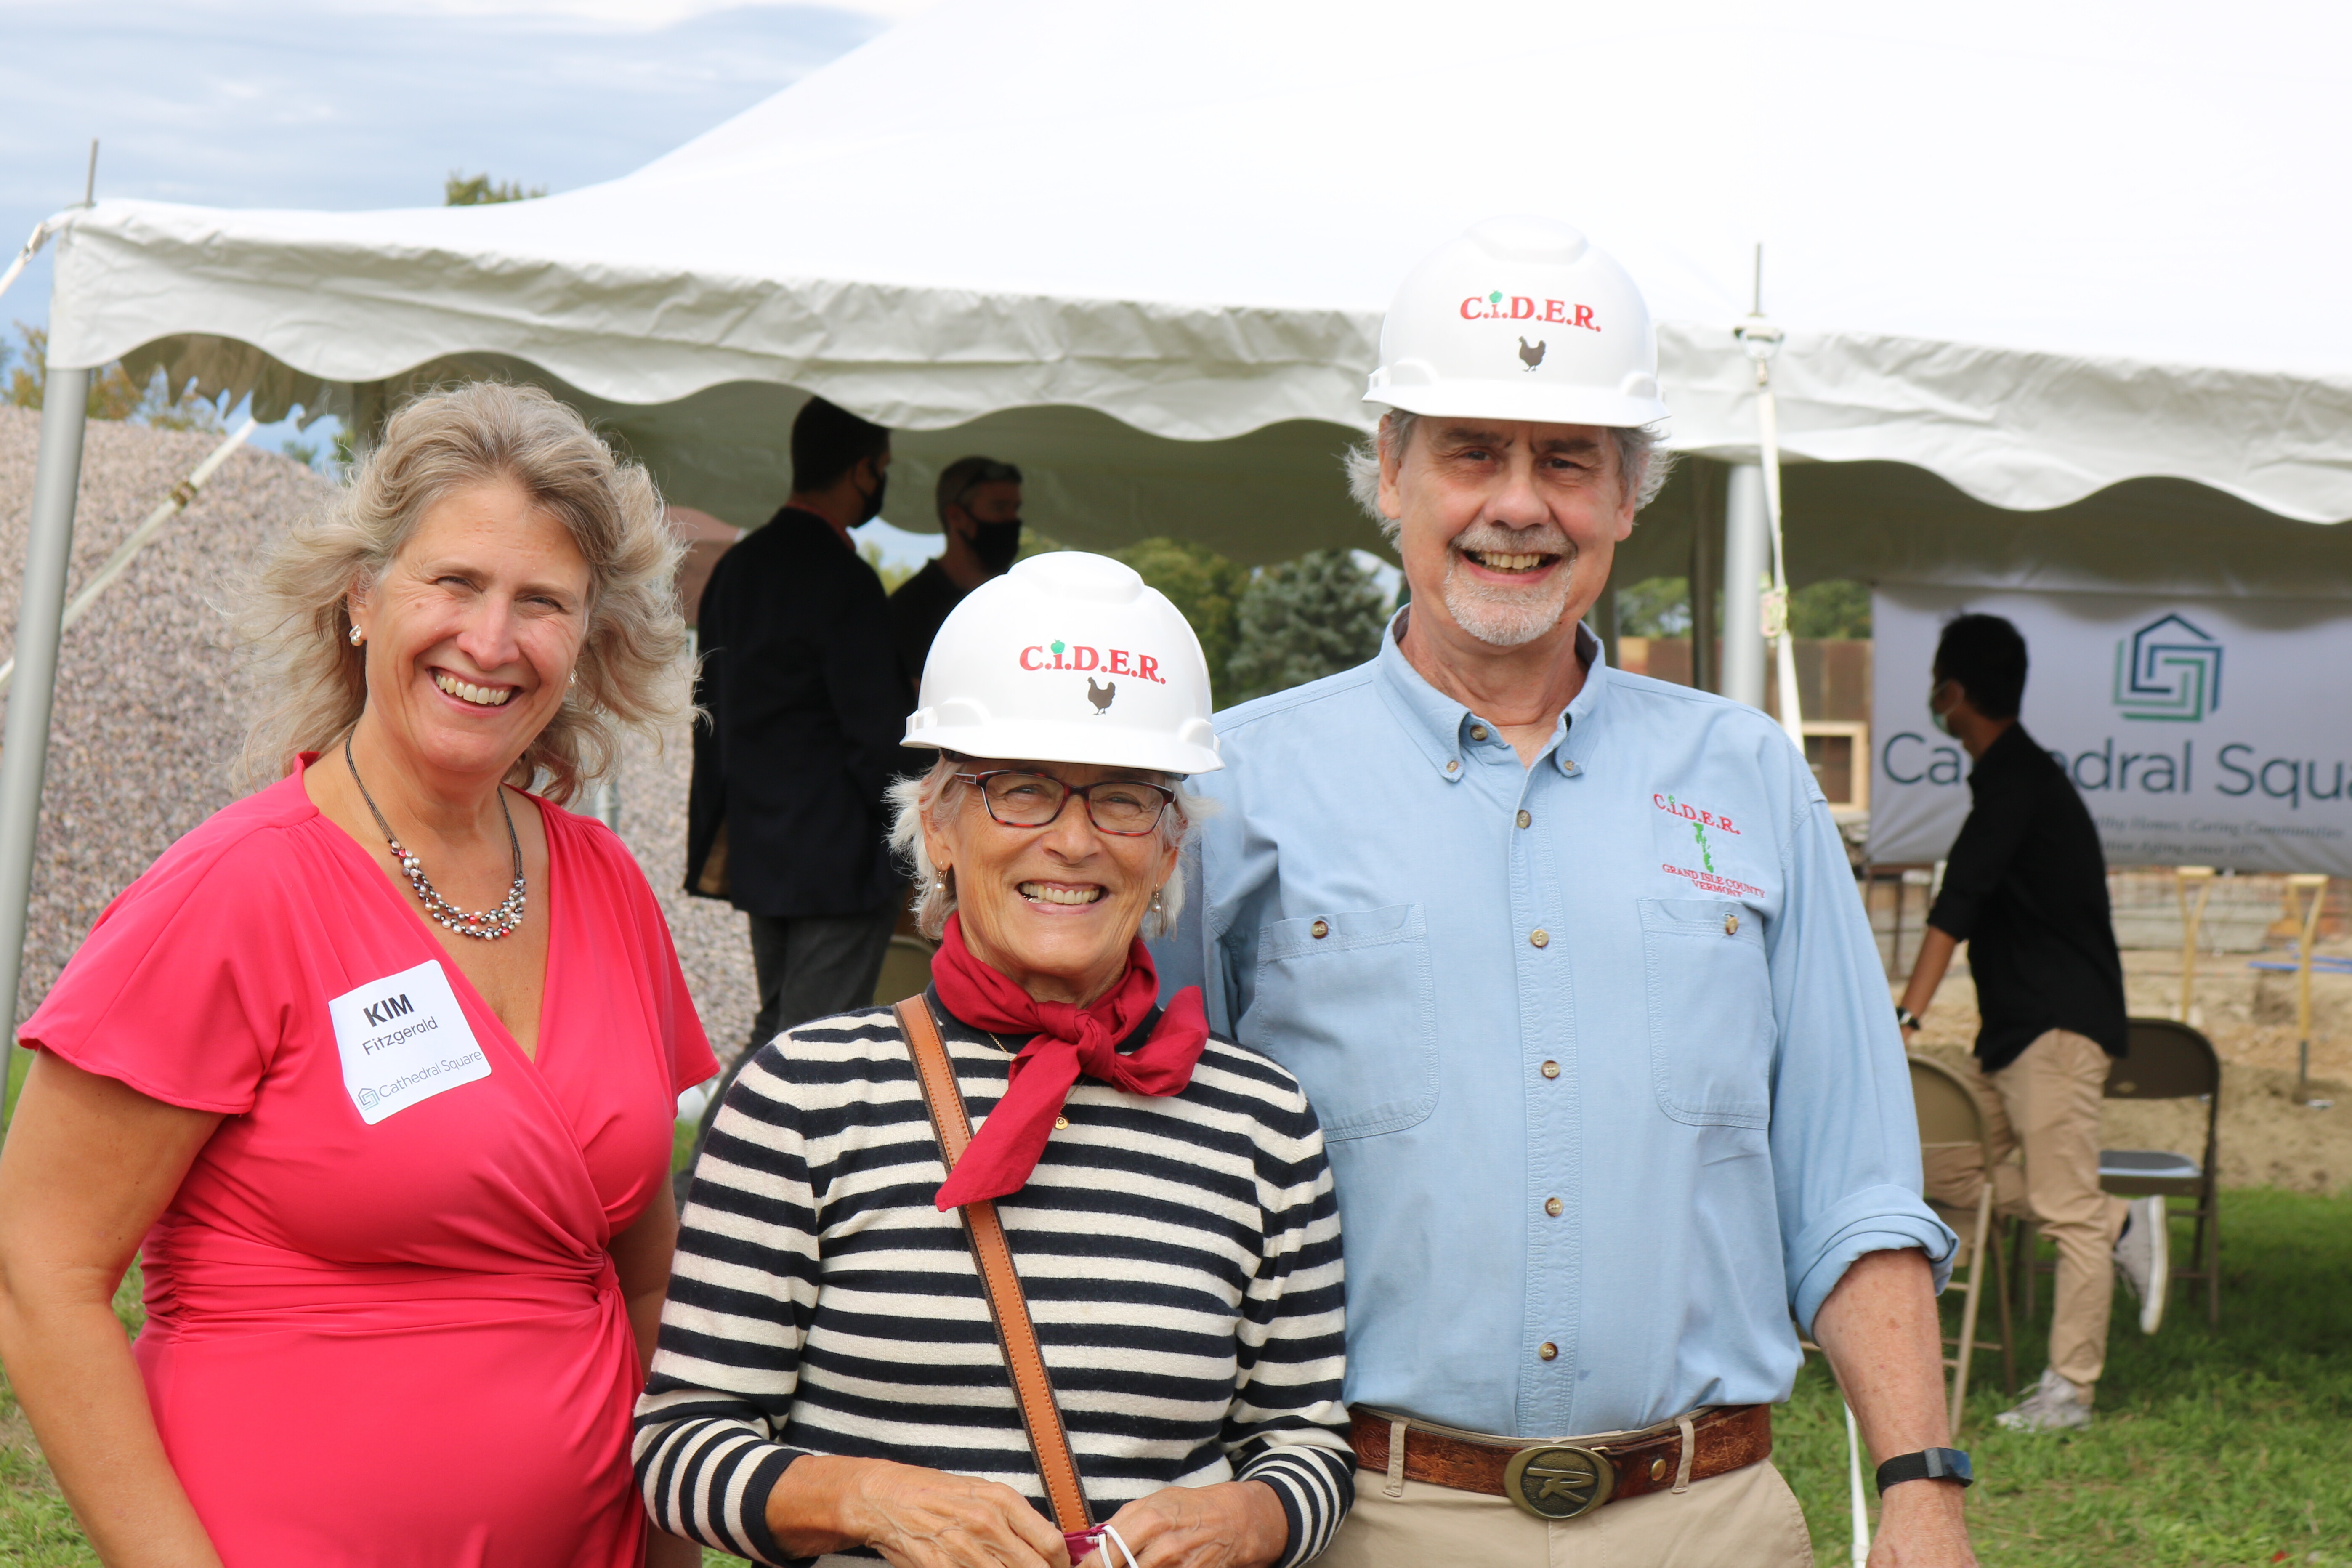 From left are Kim Fitzgerald, CEO of Cathedral Square, and Meg Pond and Robin Way of C.I.D.E.R.